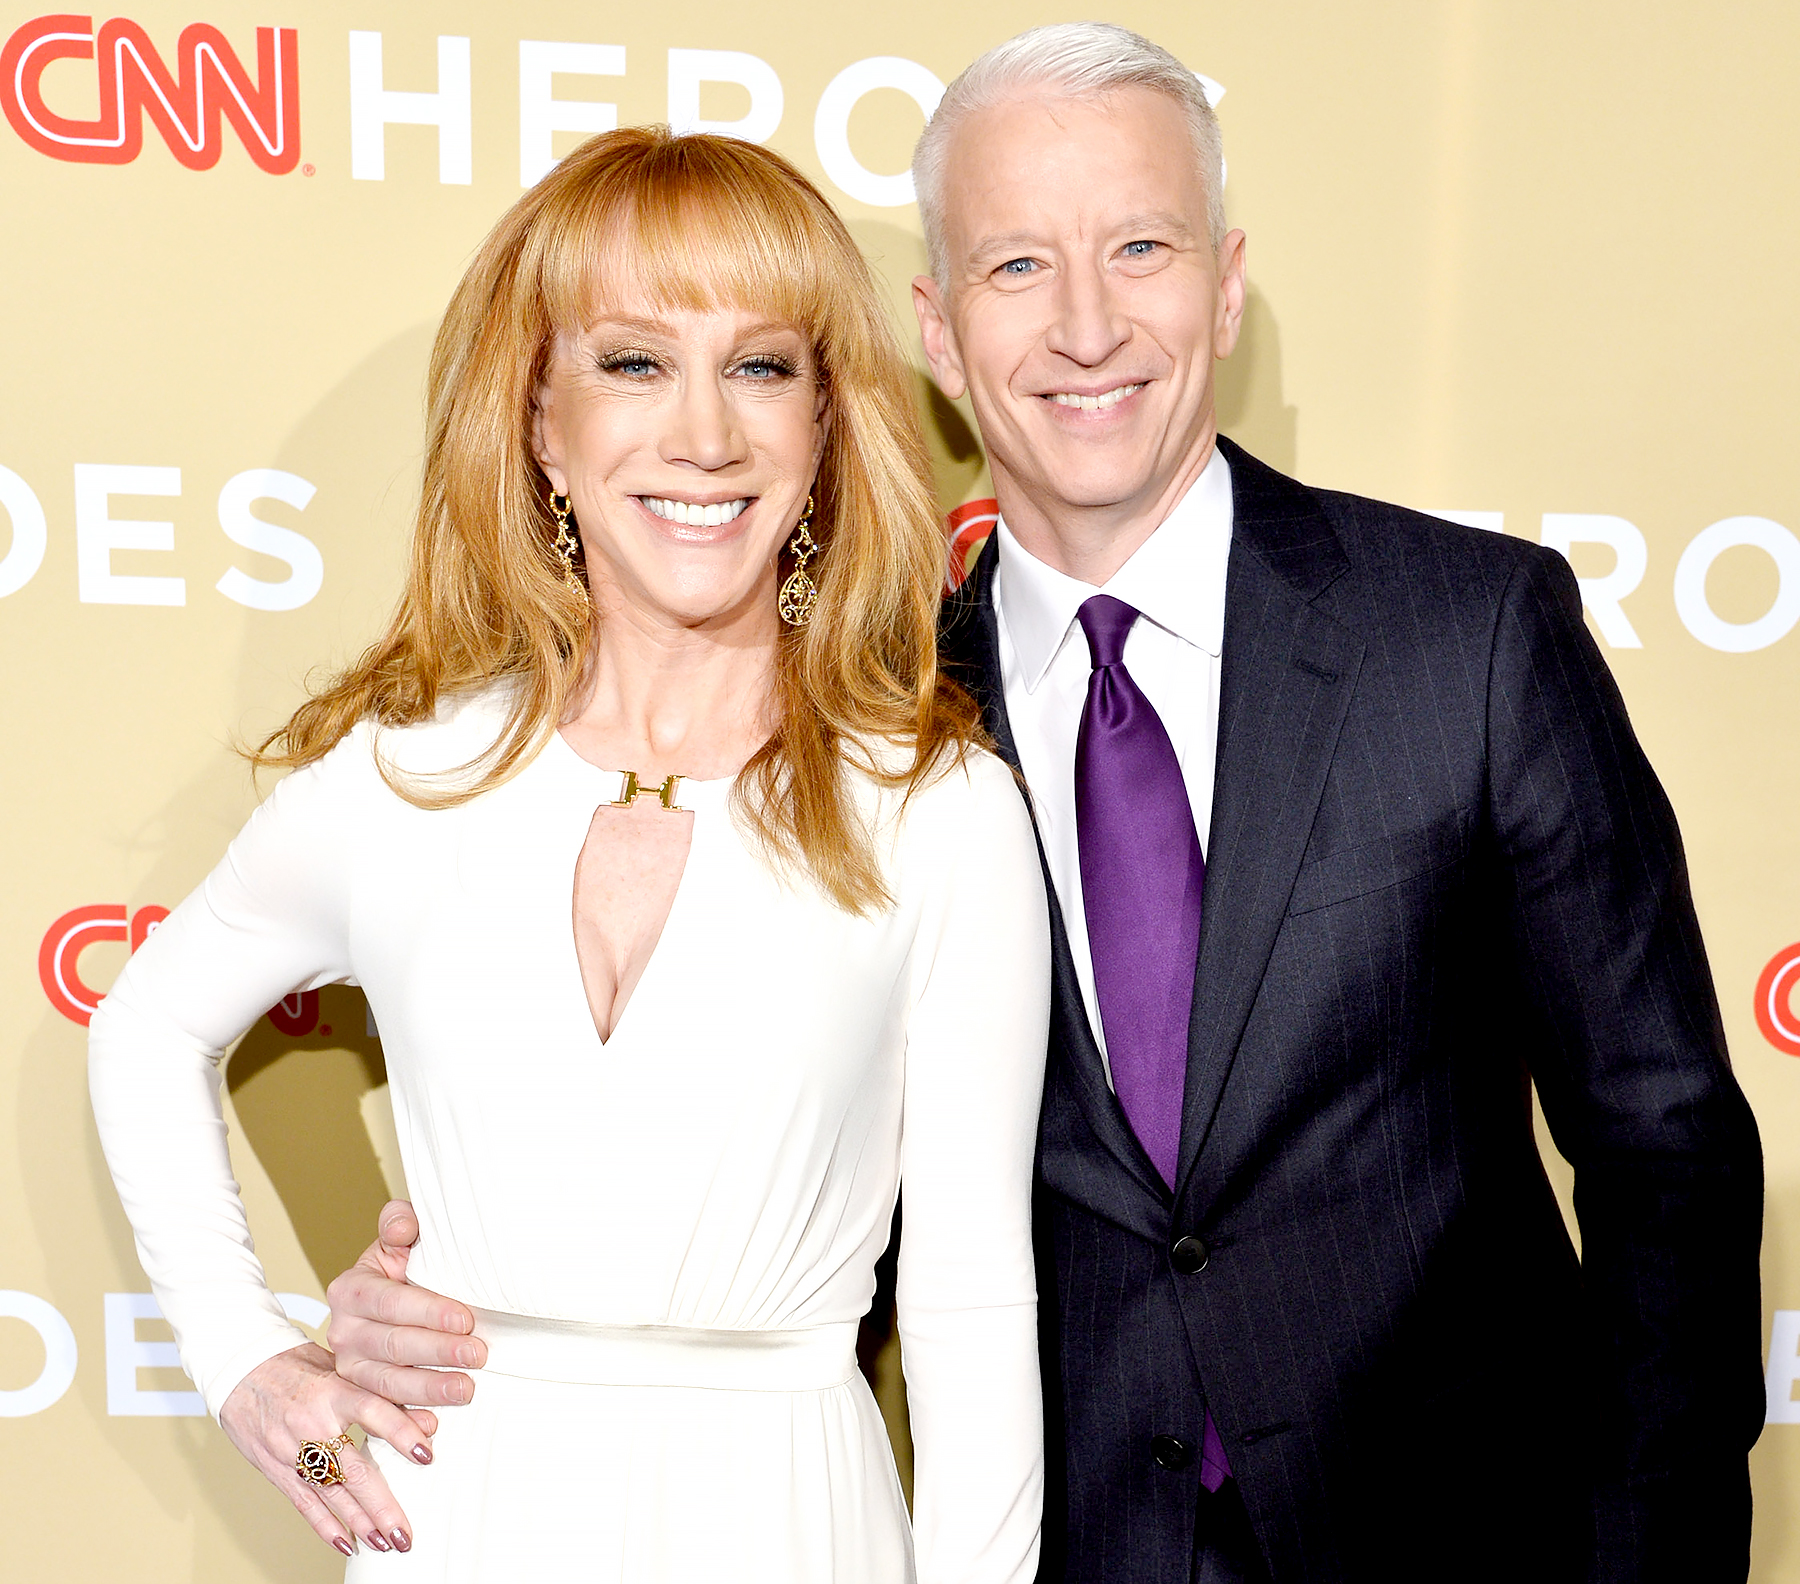 Anderson Cooper And Kathy Griffin Puppets Cnn Video | My XXX Hot Girl